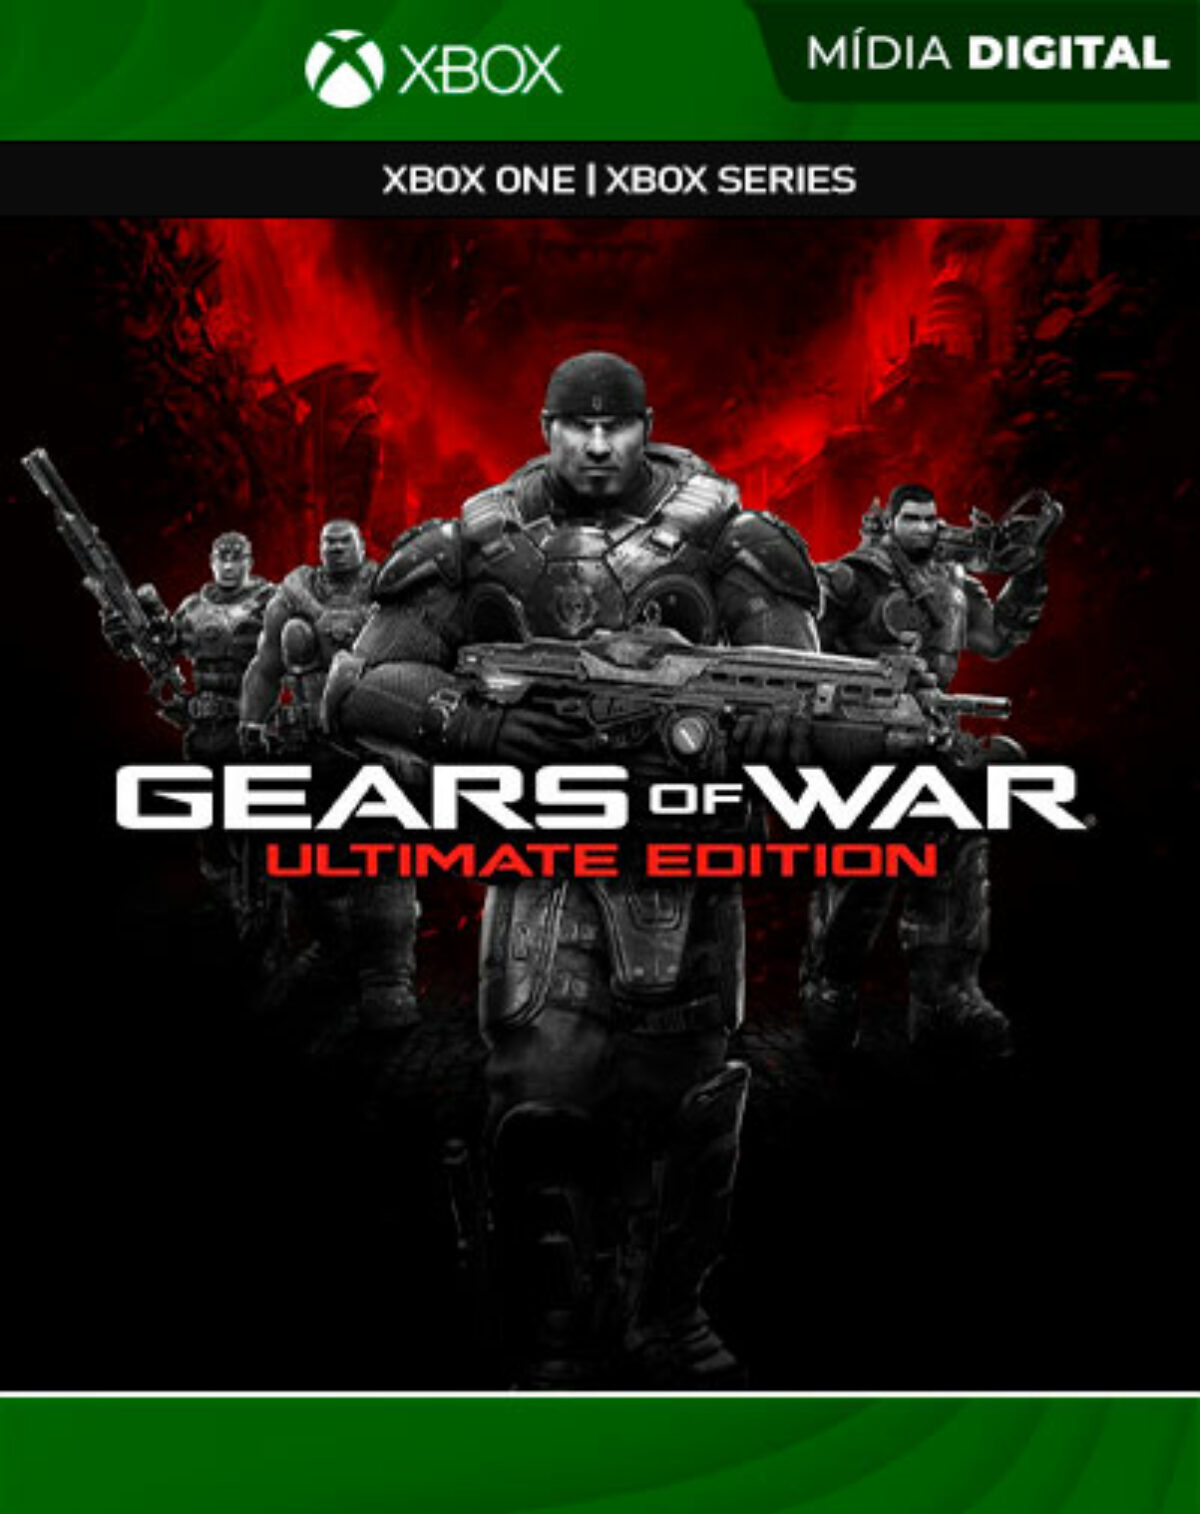 Download Xbox Gears of War 5 Game of the Year EditionXbox One